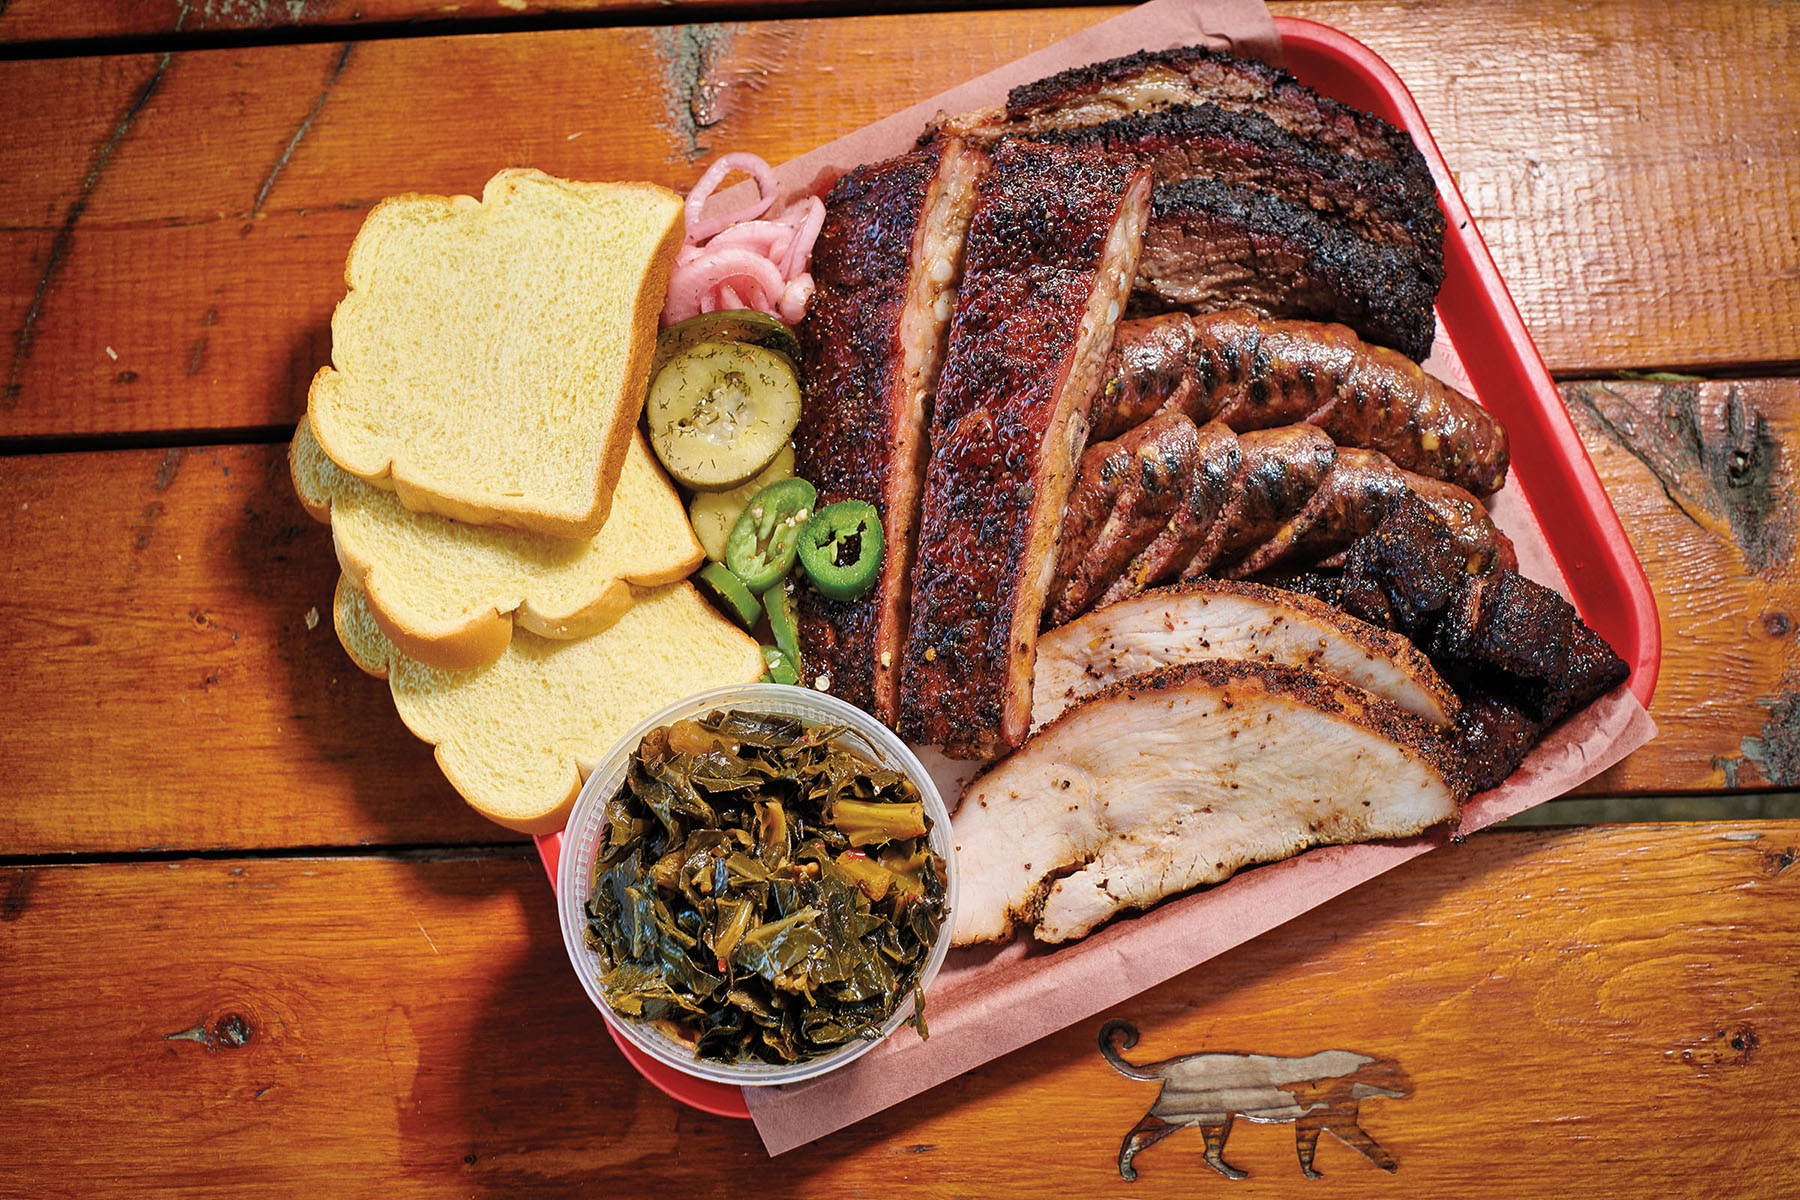 A platter of barbecue including brisket, sausage, turkey, ribs, white bread, and collard greens